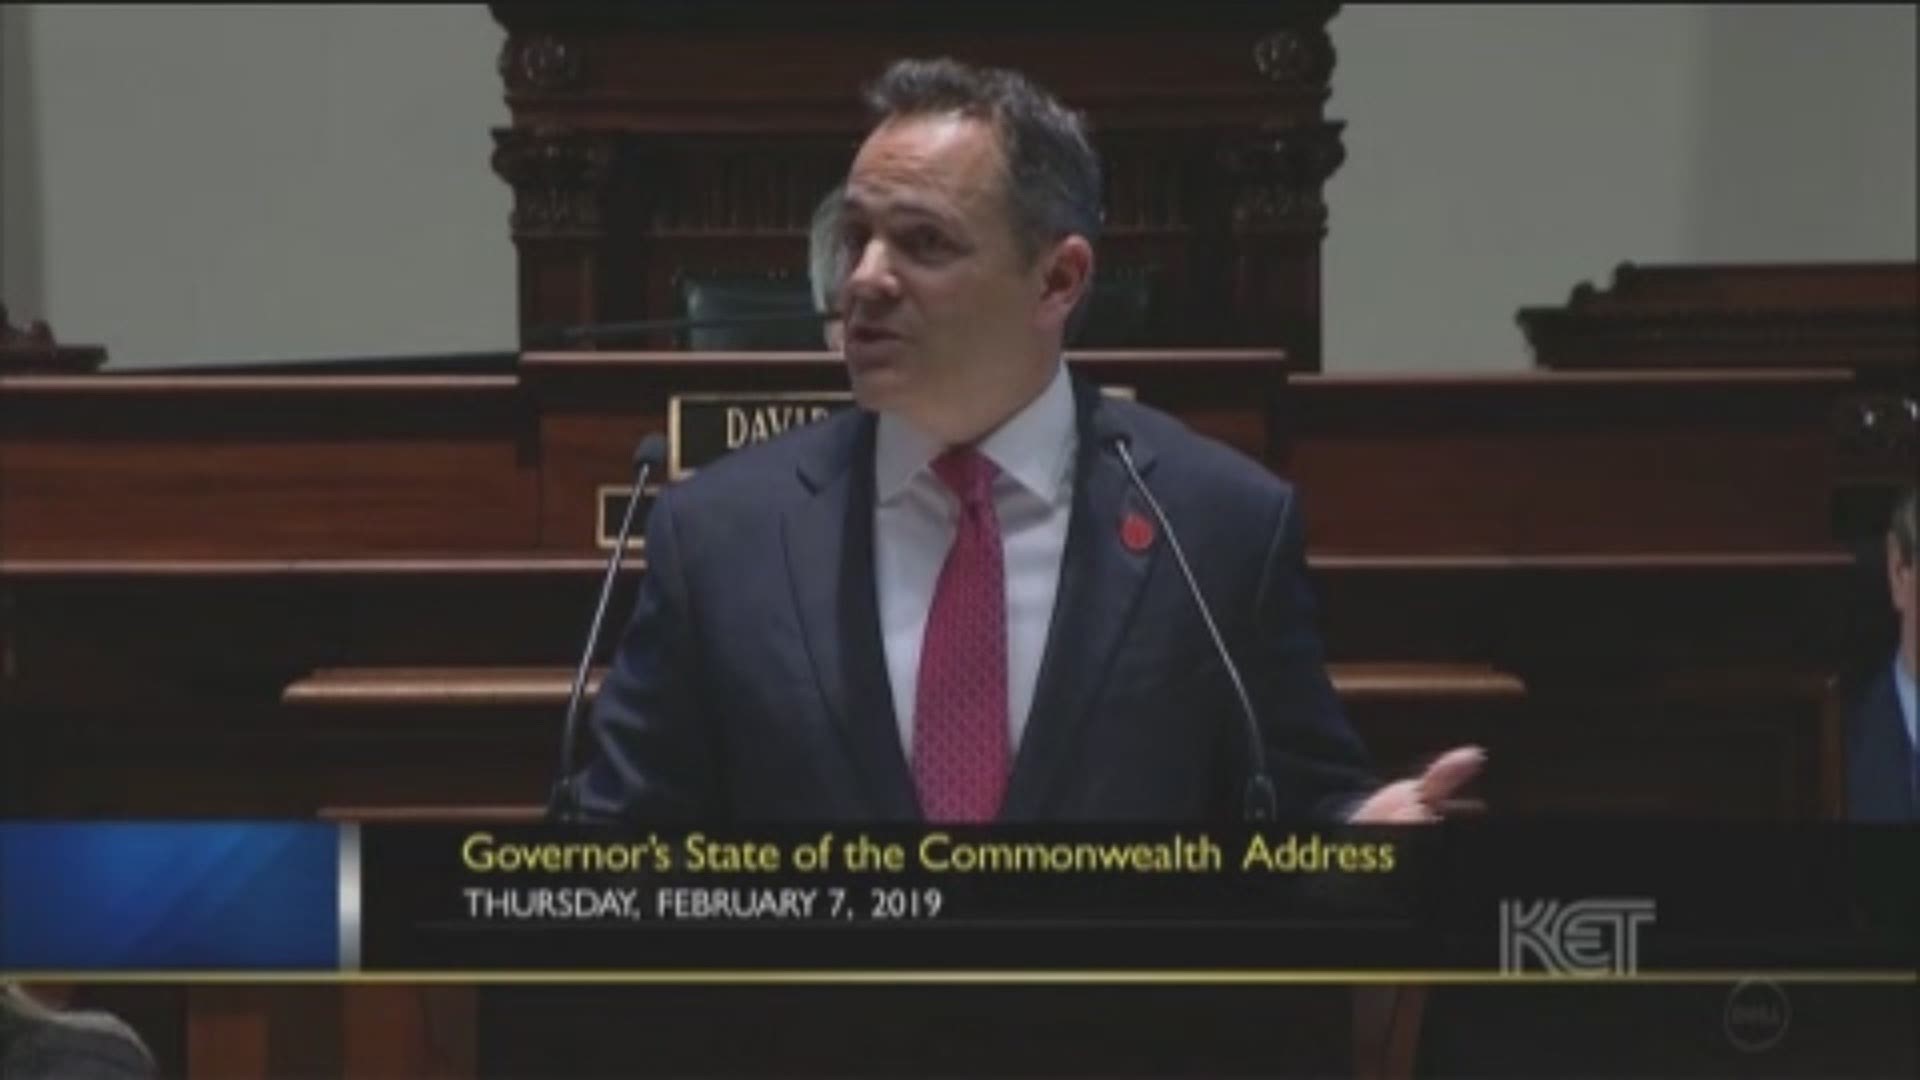 Governor Matt Bevin's full State of the Commonwealth Address. [video from KET]